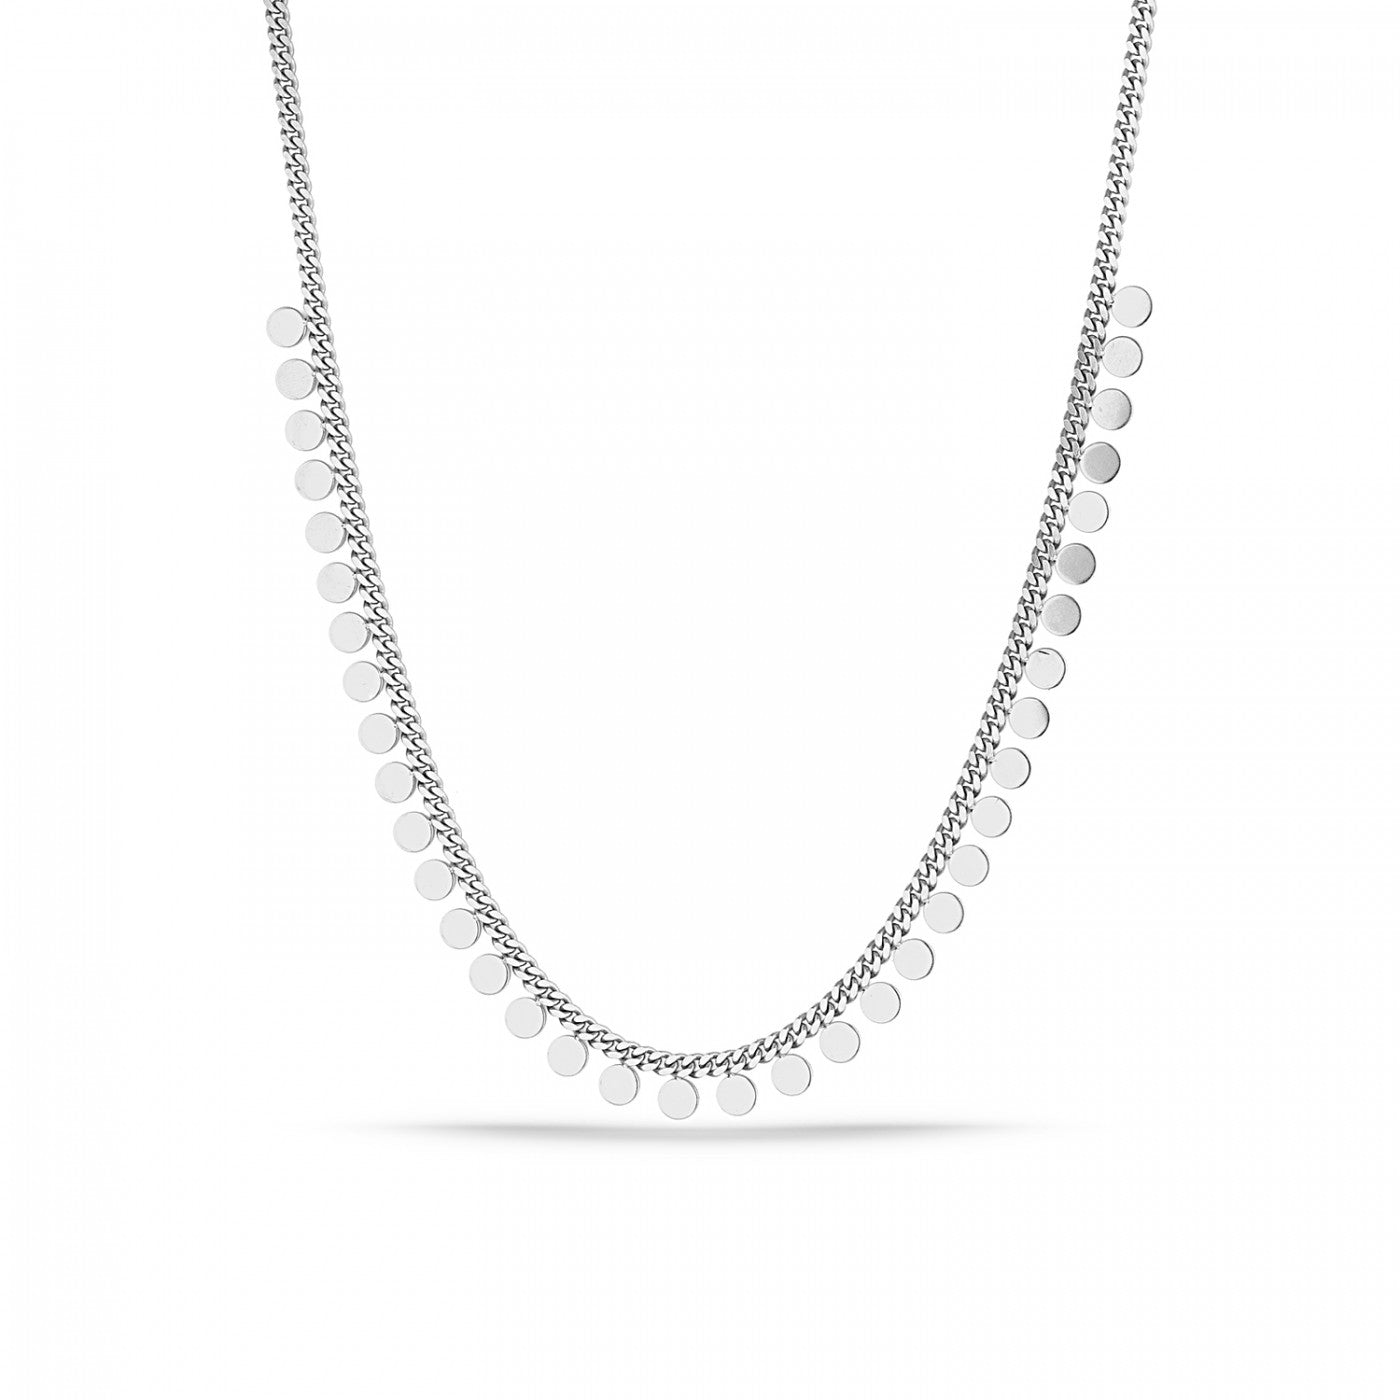 Disk Charm Coin Chain Necklace in Sterling Silver